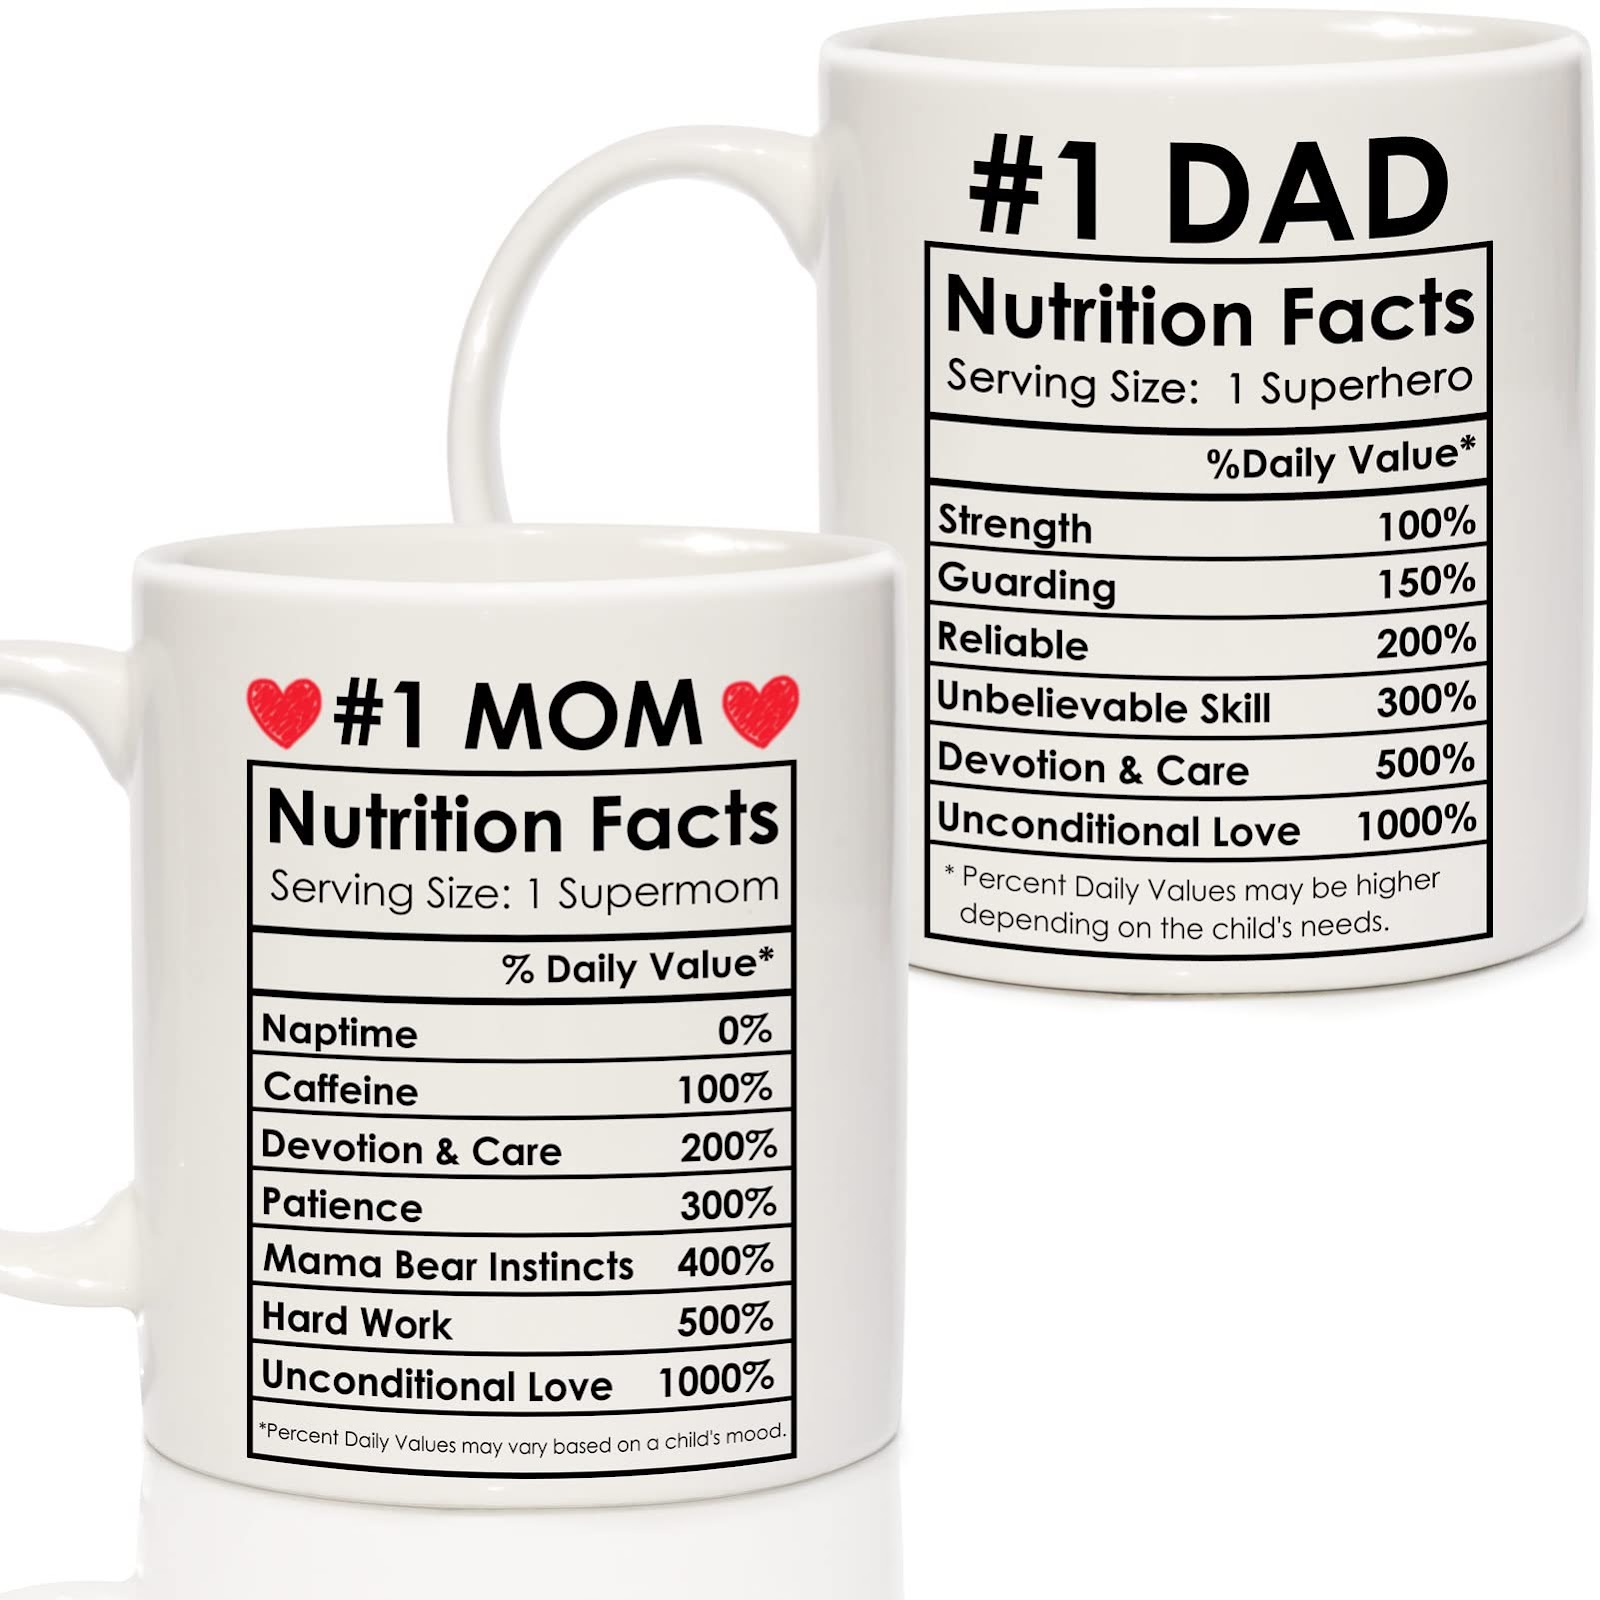 One Awesome Mom Funny Coffee Mug - Best Christmas Gifts for Mom, Women –  Wittsy Glassware